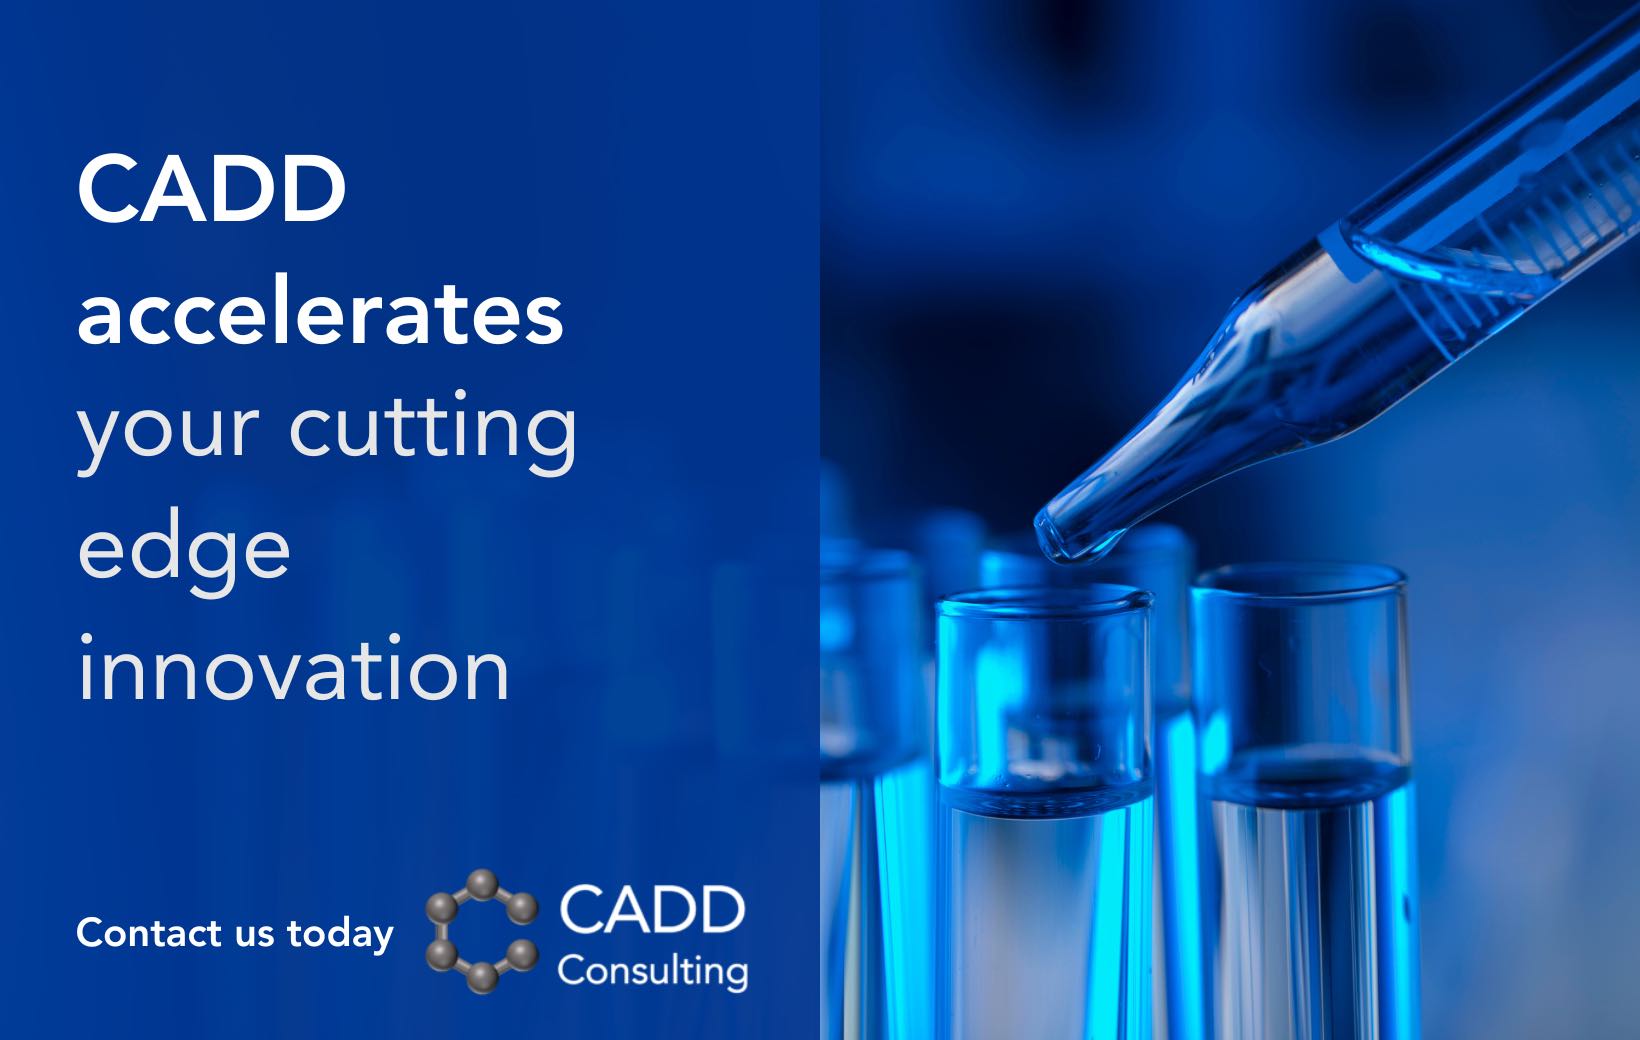 CADD accelerates your cutting edge innovation